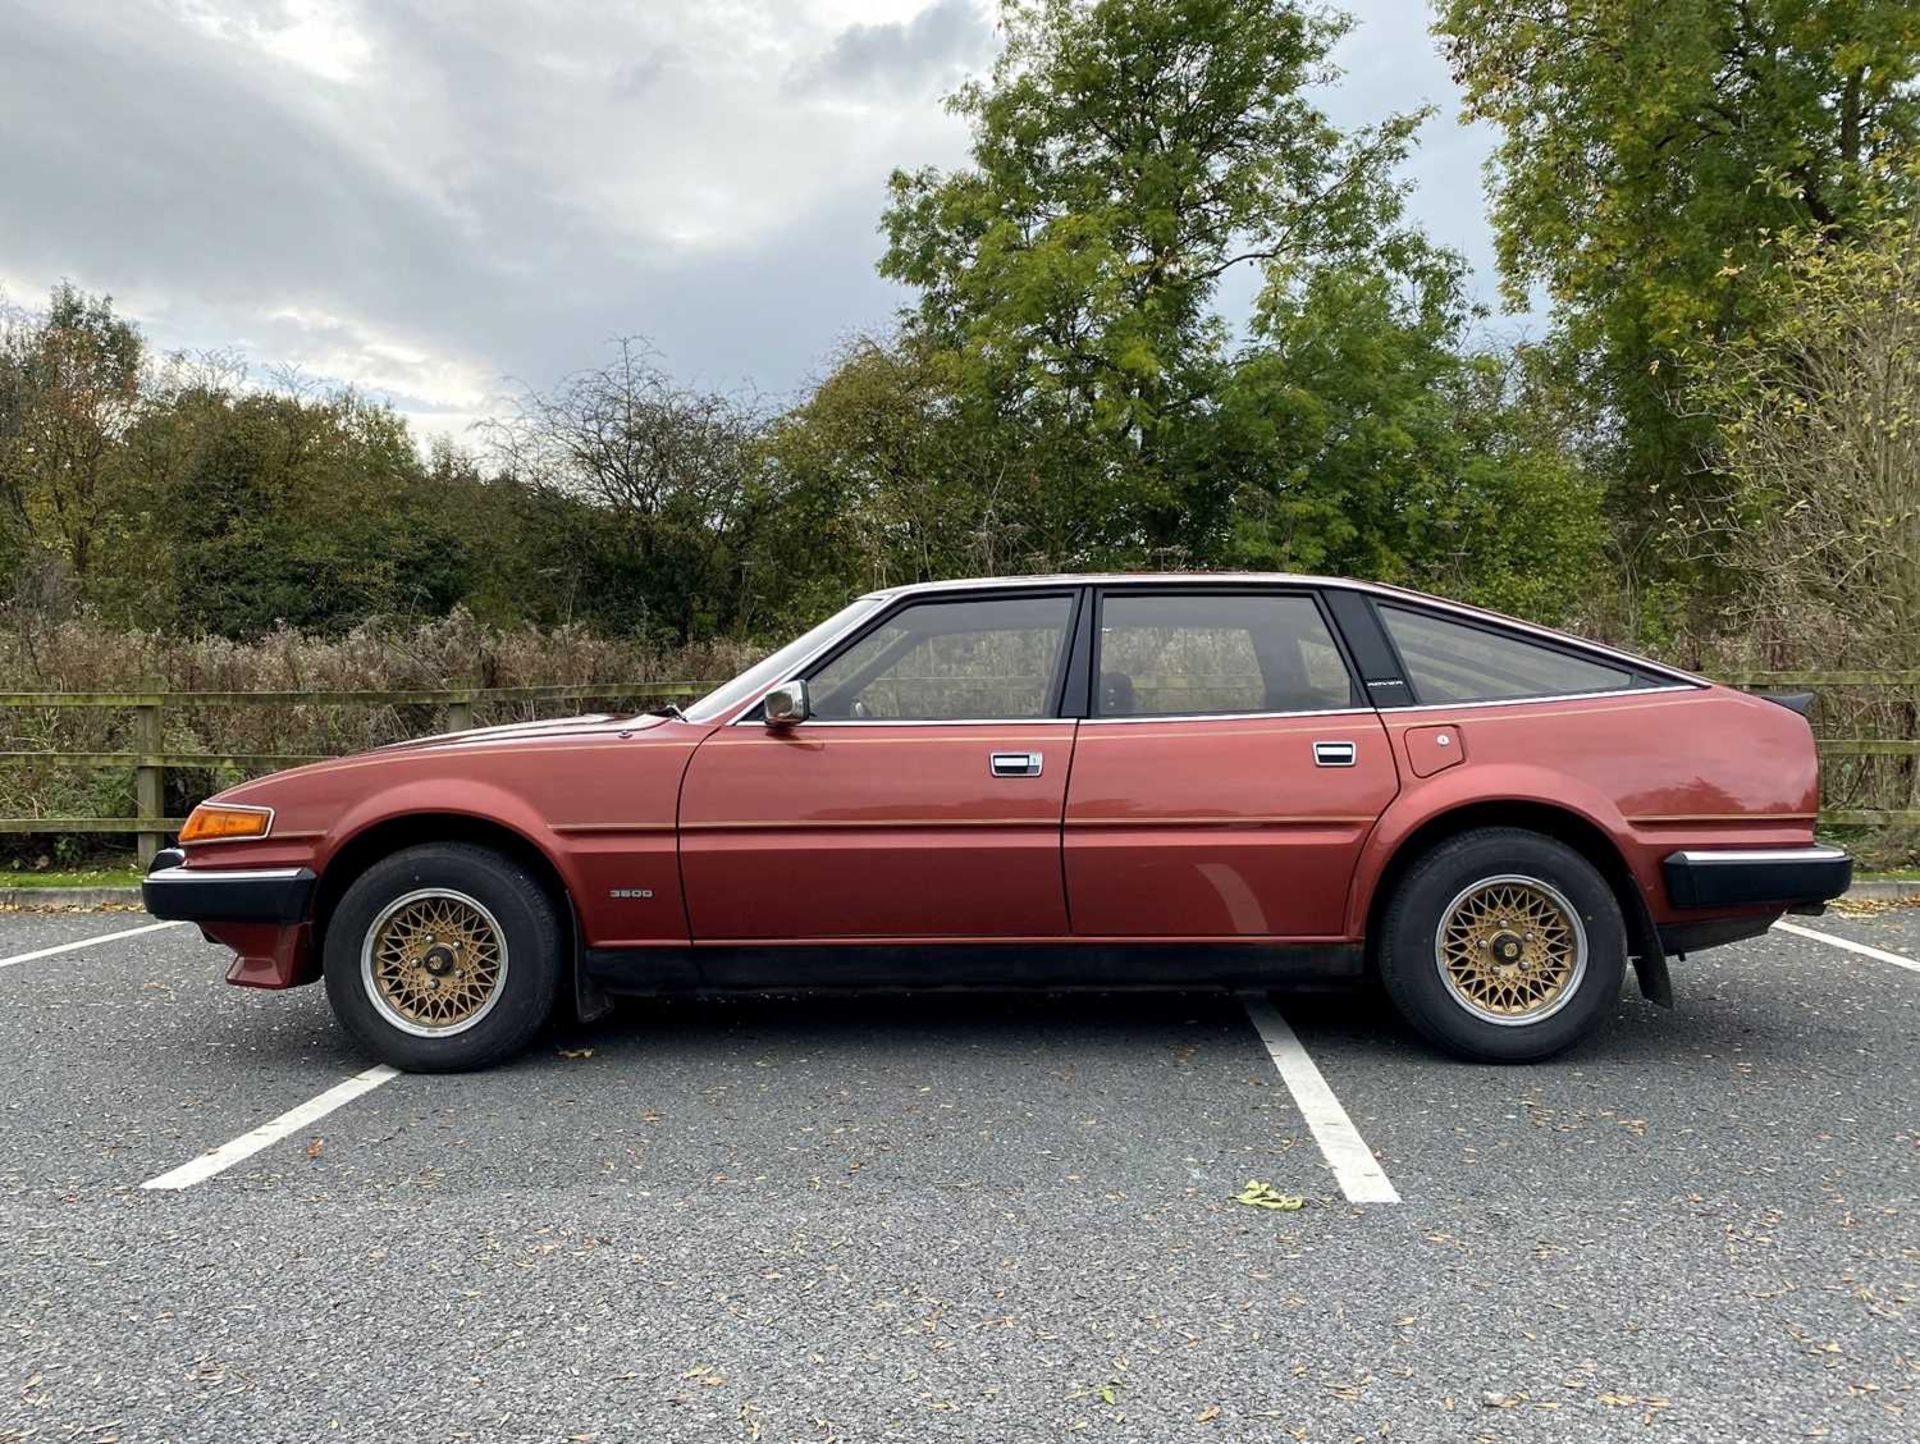 1982 Rover SD1 3500 SE Only 29,000 miles - Image 12 of 100